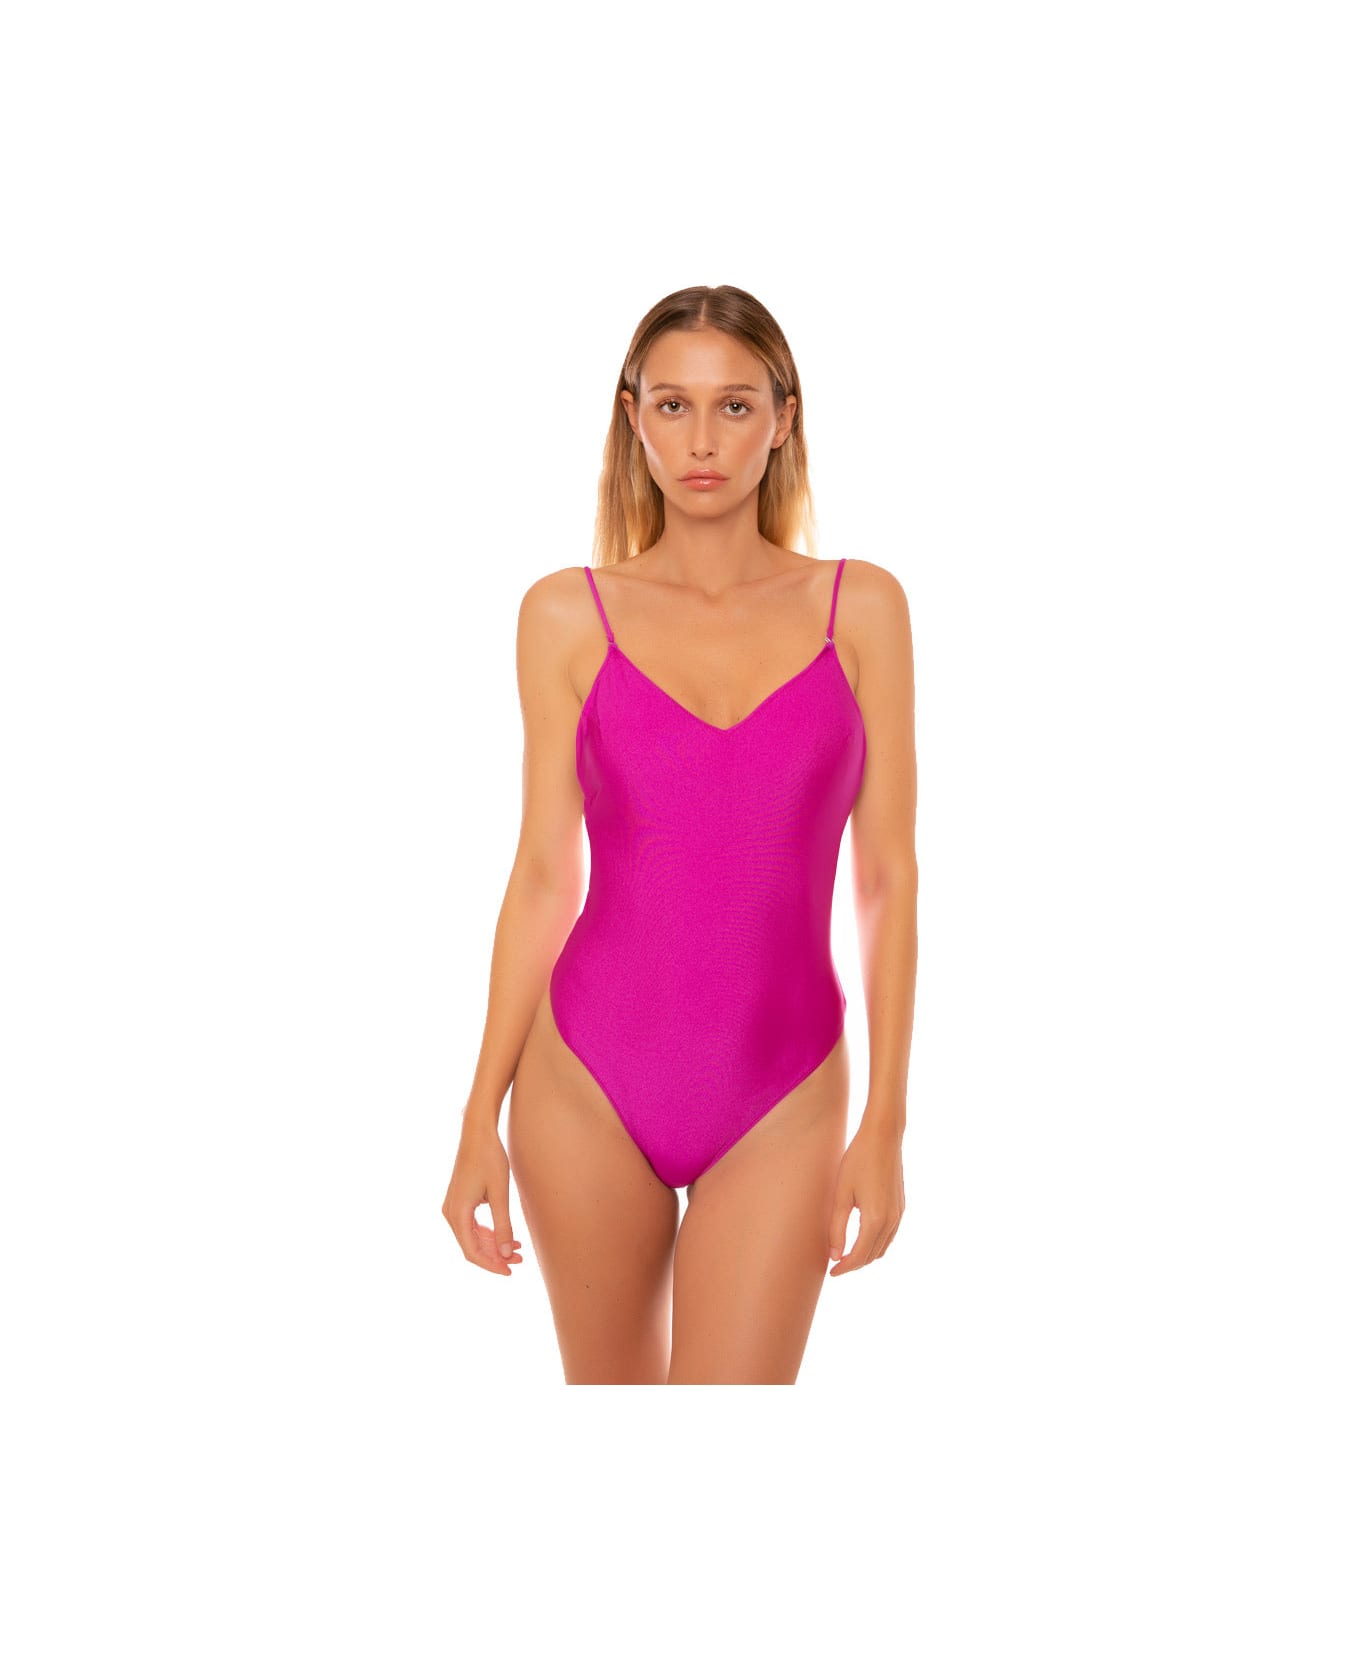 MC2 Saint Barth Fuchsia One Piece (shoulder Straps Sold Separately) | Aperikini Collection - PINK ワンピース